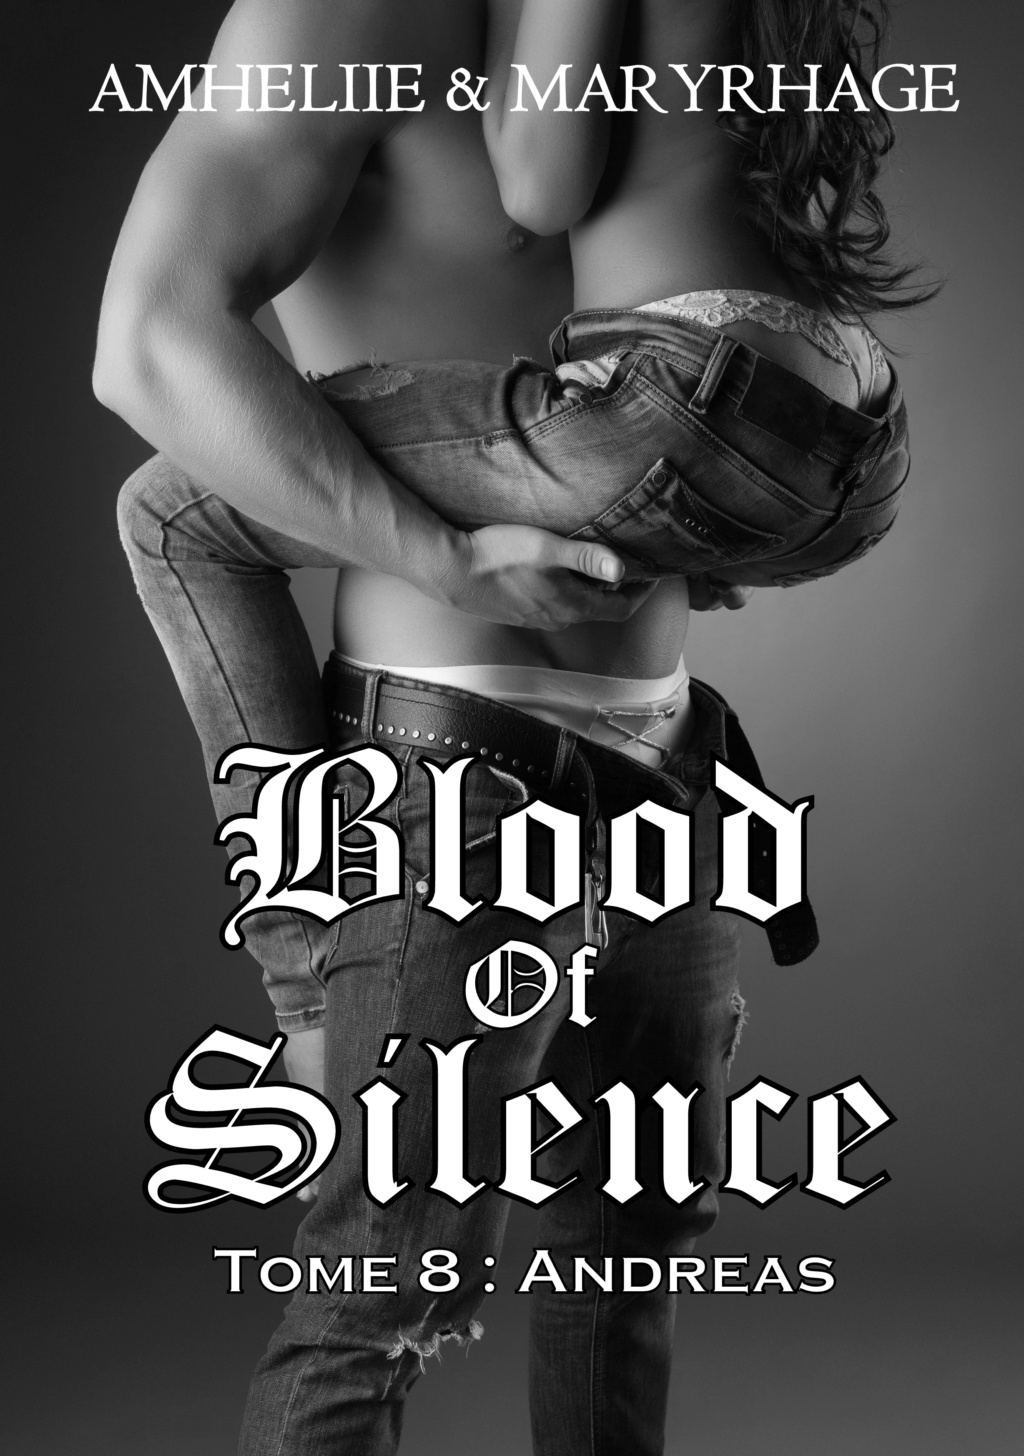 AMHELIIE & MARYRHAGE - BLOOD OF SILENCE - Tome 8 : Andreas Blood-12